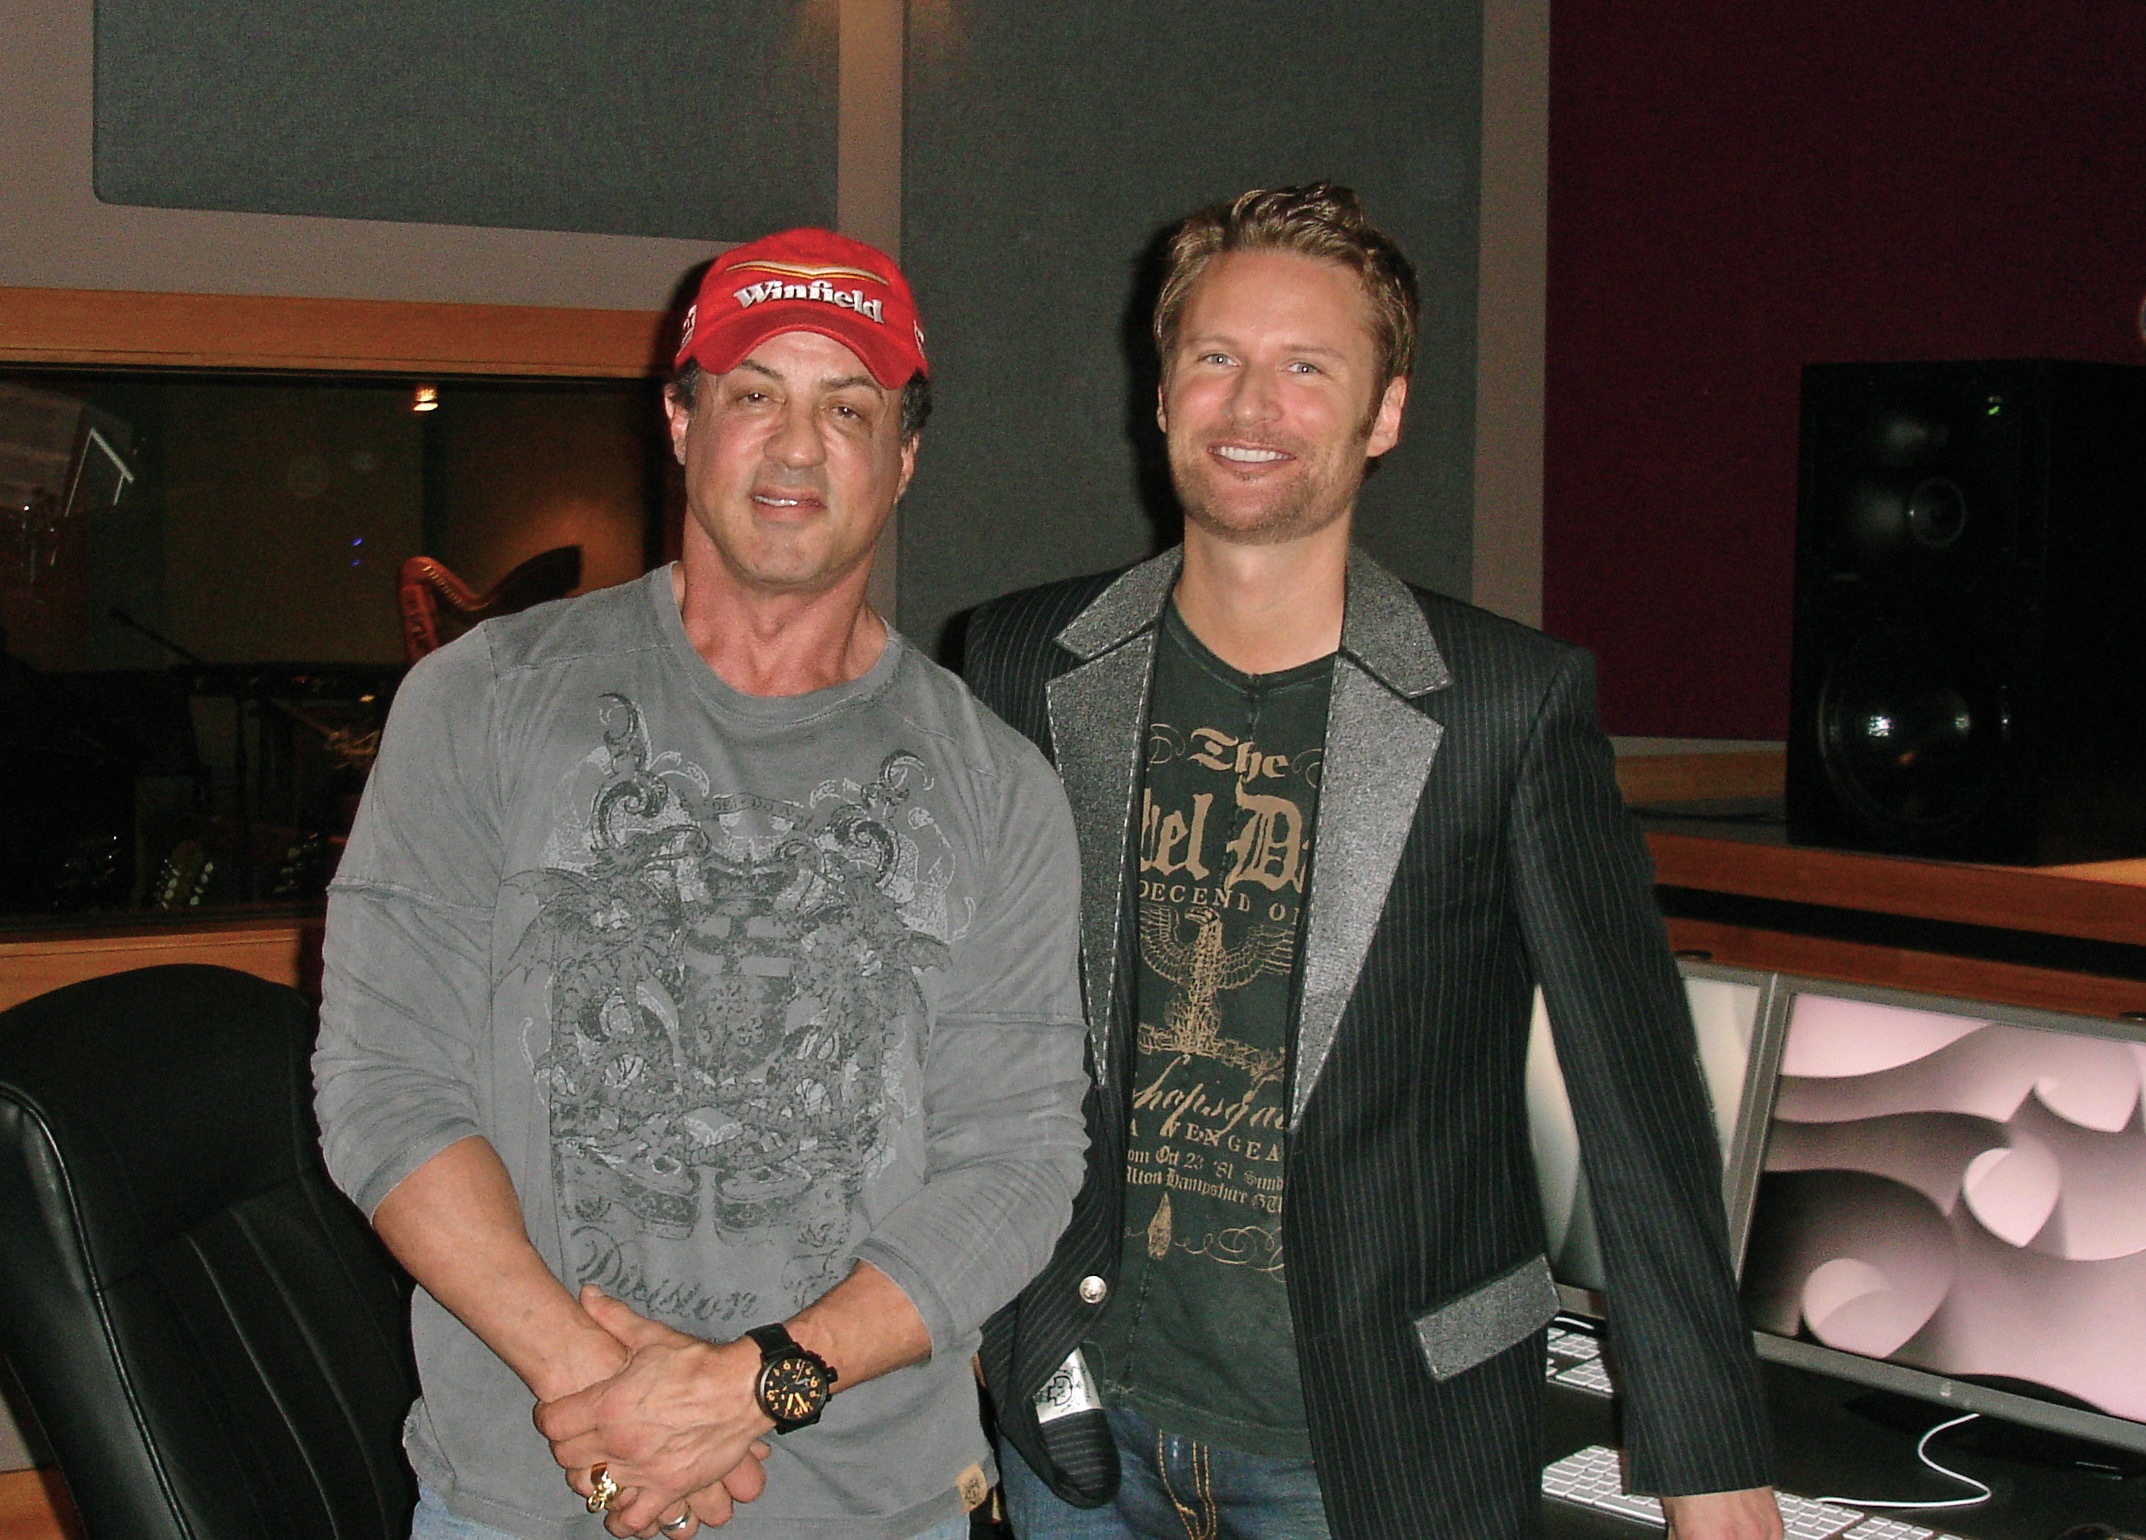 Director of Rambo Sylvester Stallone and composer Brian Tyler